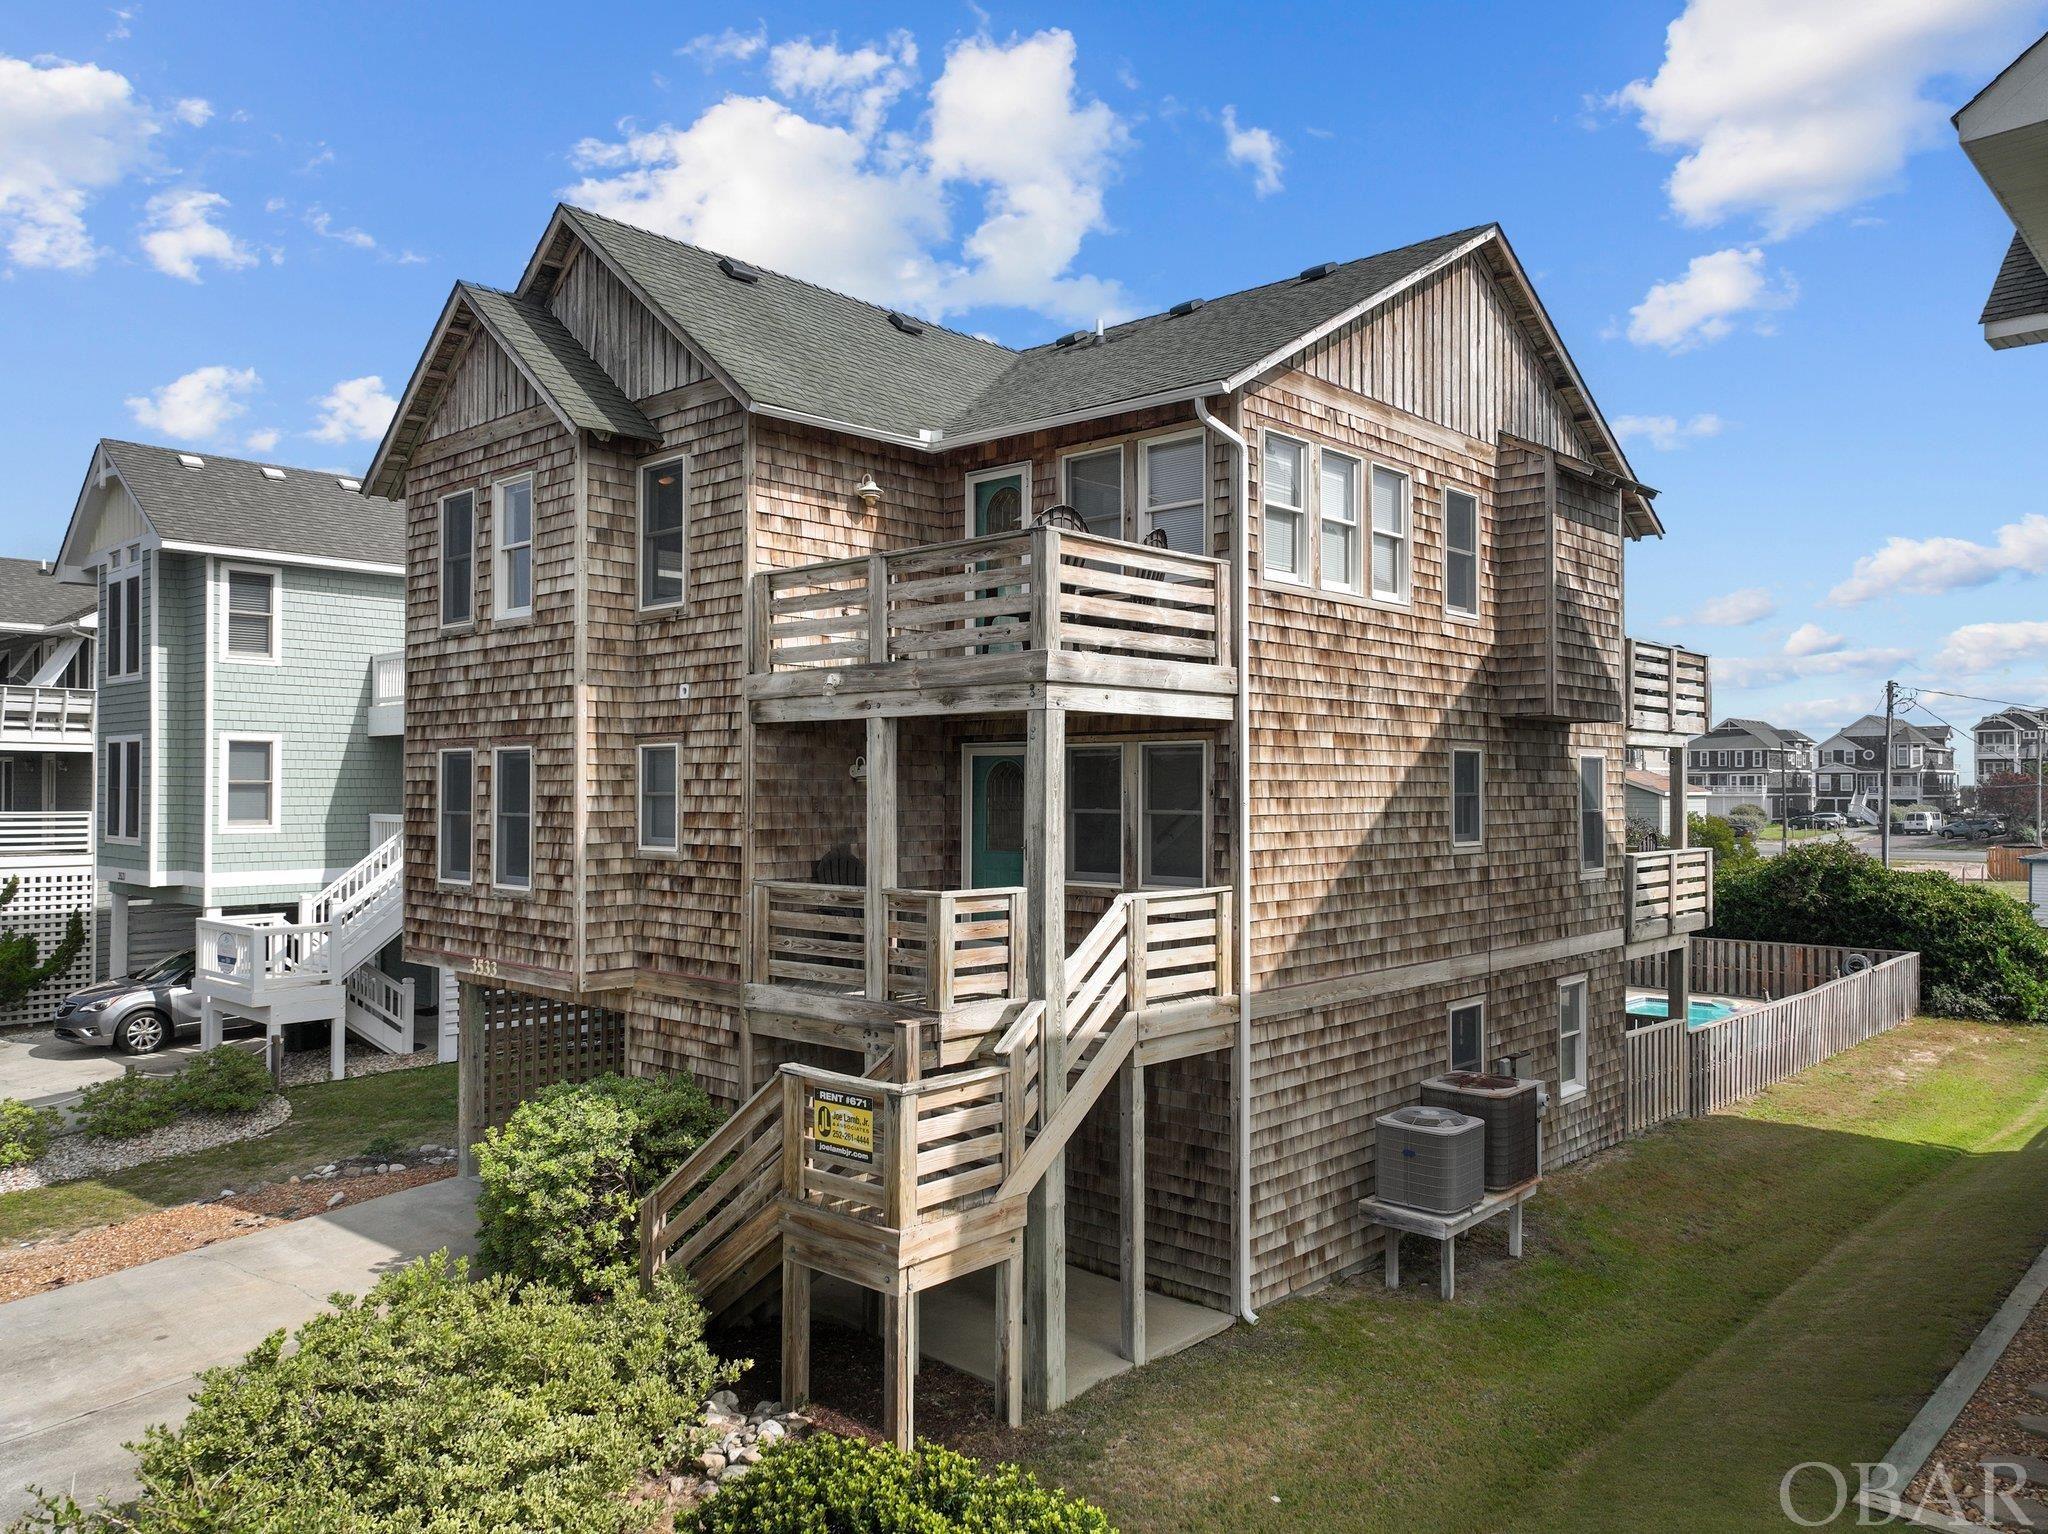 Located in an X Flood Zone, across the street from the entrance to Jockey's Ridge, close to restaurants, shopping and Nags Head Fishing Pier with easy beach access.  Old Nags Head Place provides all the charm of the historic Nags Head architecture while providing the desired amenities of today including a reverse floor plan to showcase the ocean views with an open concept living area, multiple en suite bedrooms, game room, pool and hot tub. Plus, FRESHLY PAINTED INTERIOR. New pics to come.  Owners restrict rentals to peak season only.